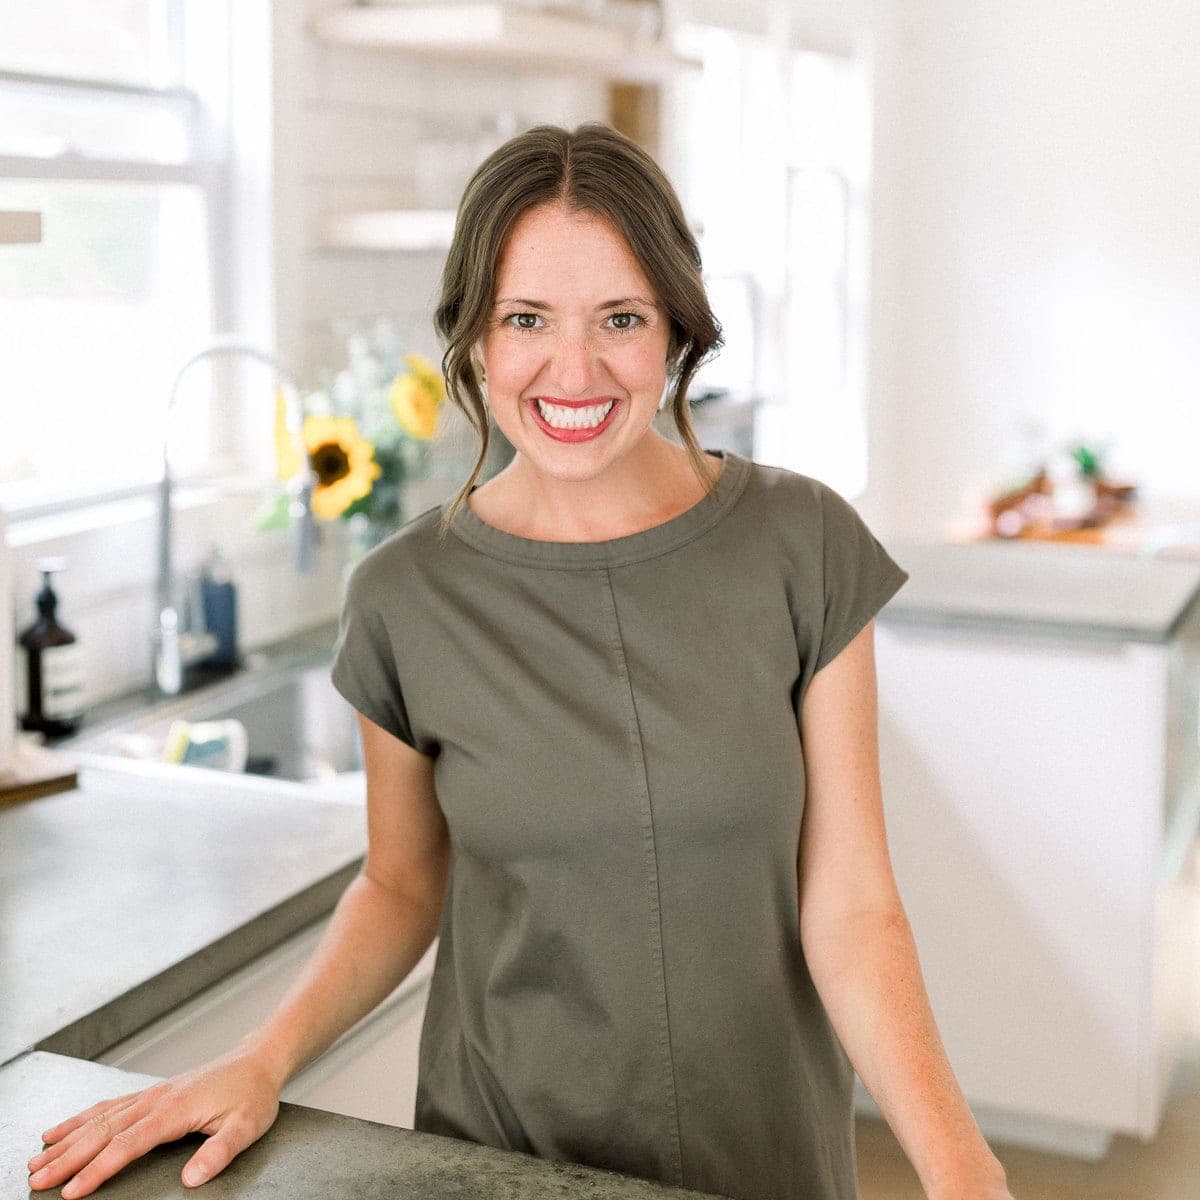 A fit foodie finds woman standing in front of a kitchen counter wearing a gray shirt.